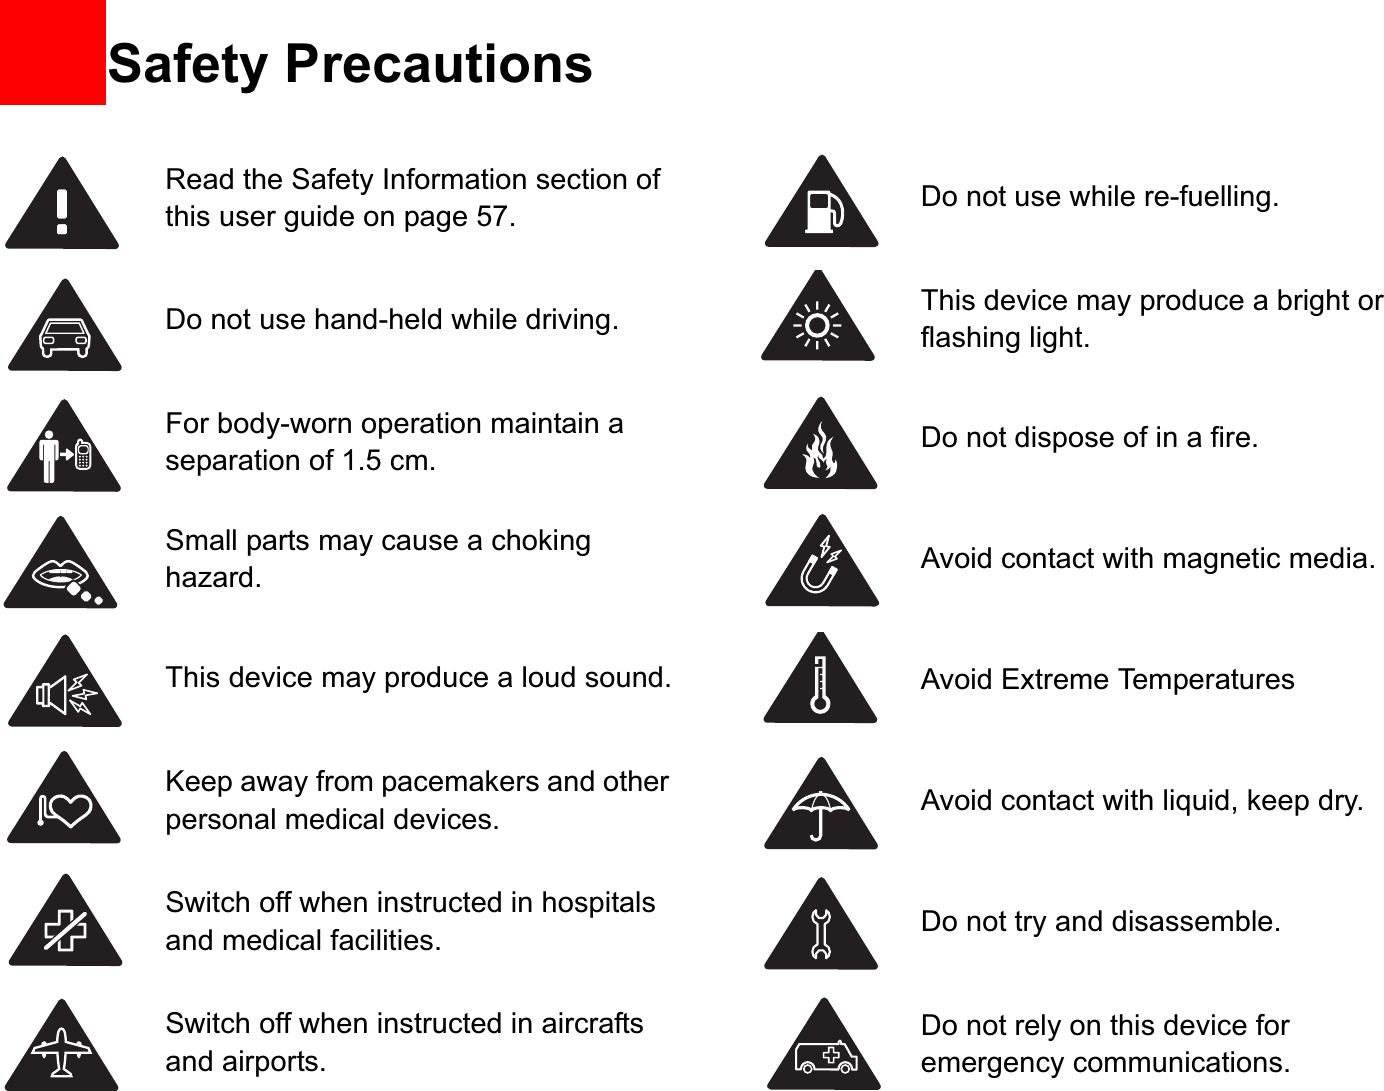 13Read the Safety Information section ofthis user guide on page 57.             Do not use hand-held while driving.For body-worn operation maintain a separation of 1.5 cm.Small parts may cause a choking hazard.This device may produce a loud sound.Keep away from pacemakers and other personal medical devices.Switch off when instructed in hospitals and medical facilities.Switch off when instructed in aircrafts and airports.Do not use while re-fuelling.This device may produce a bright or flashing light.Do not dispose of in a fire.Avoid contact with magnetic media.Avoid Extreme TemperaturesAvoid contact with liquid, keep dry.Do not try and disassemble.Do not rely on this device for emergency communications.Safety Precautions